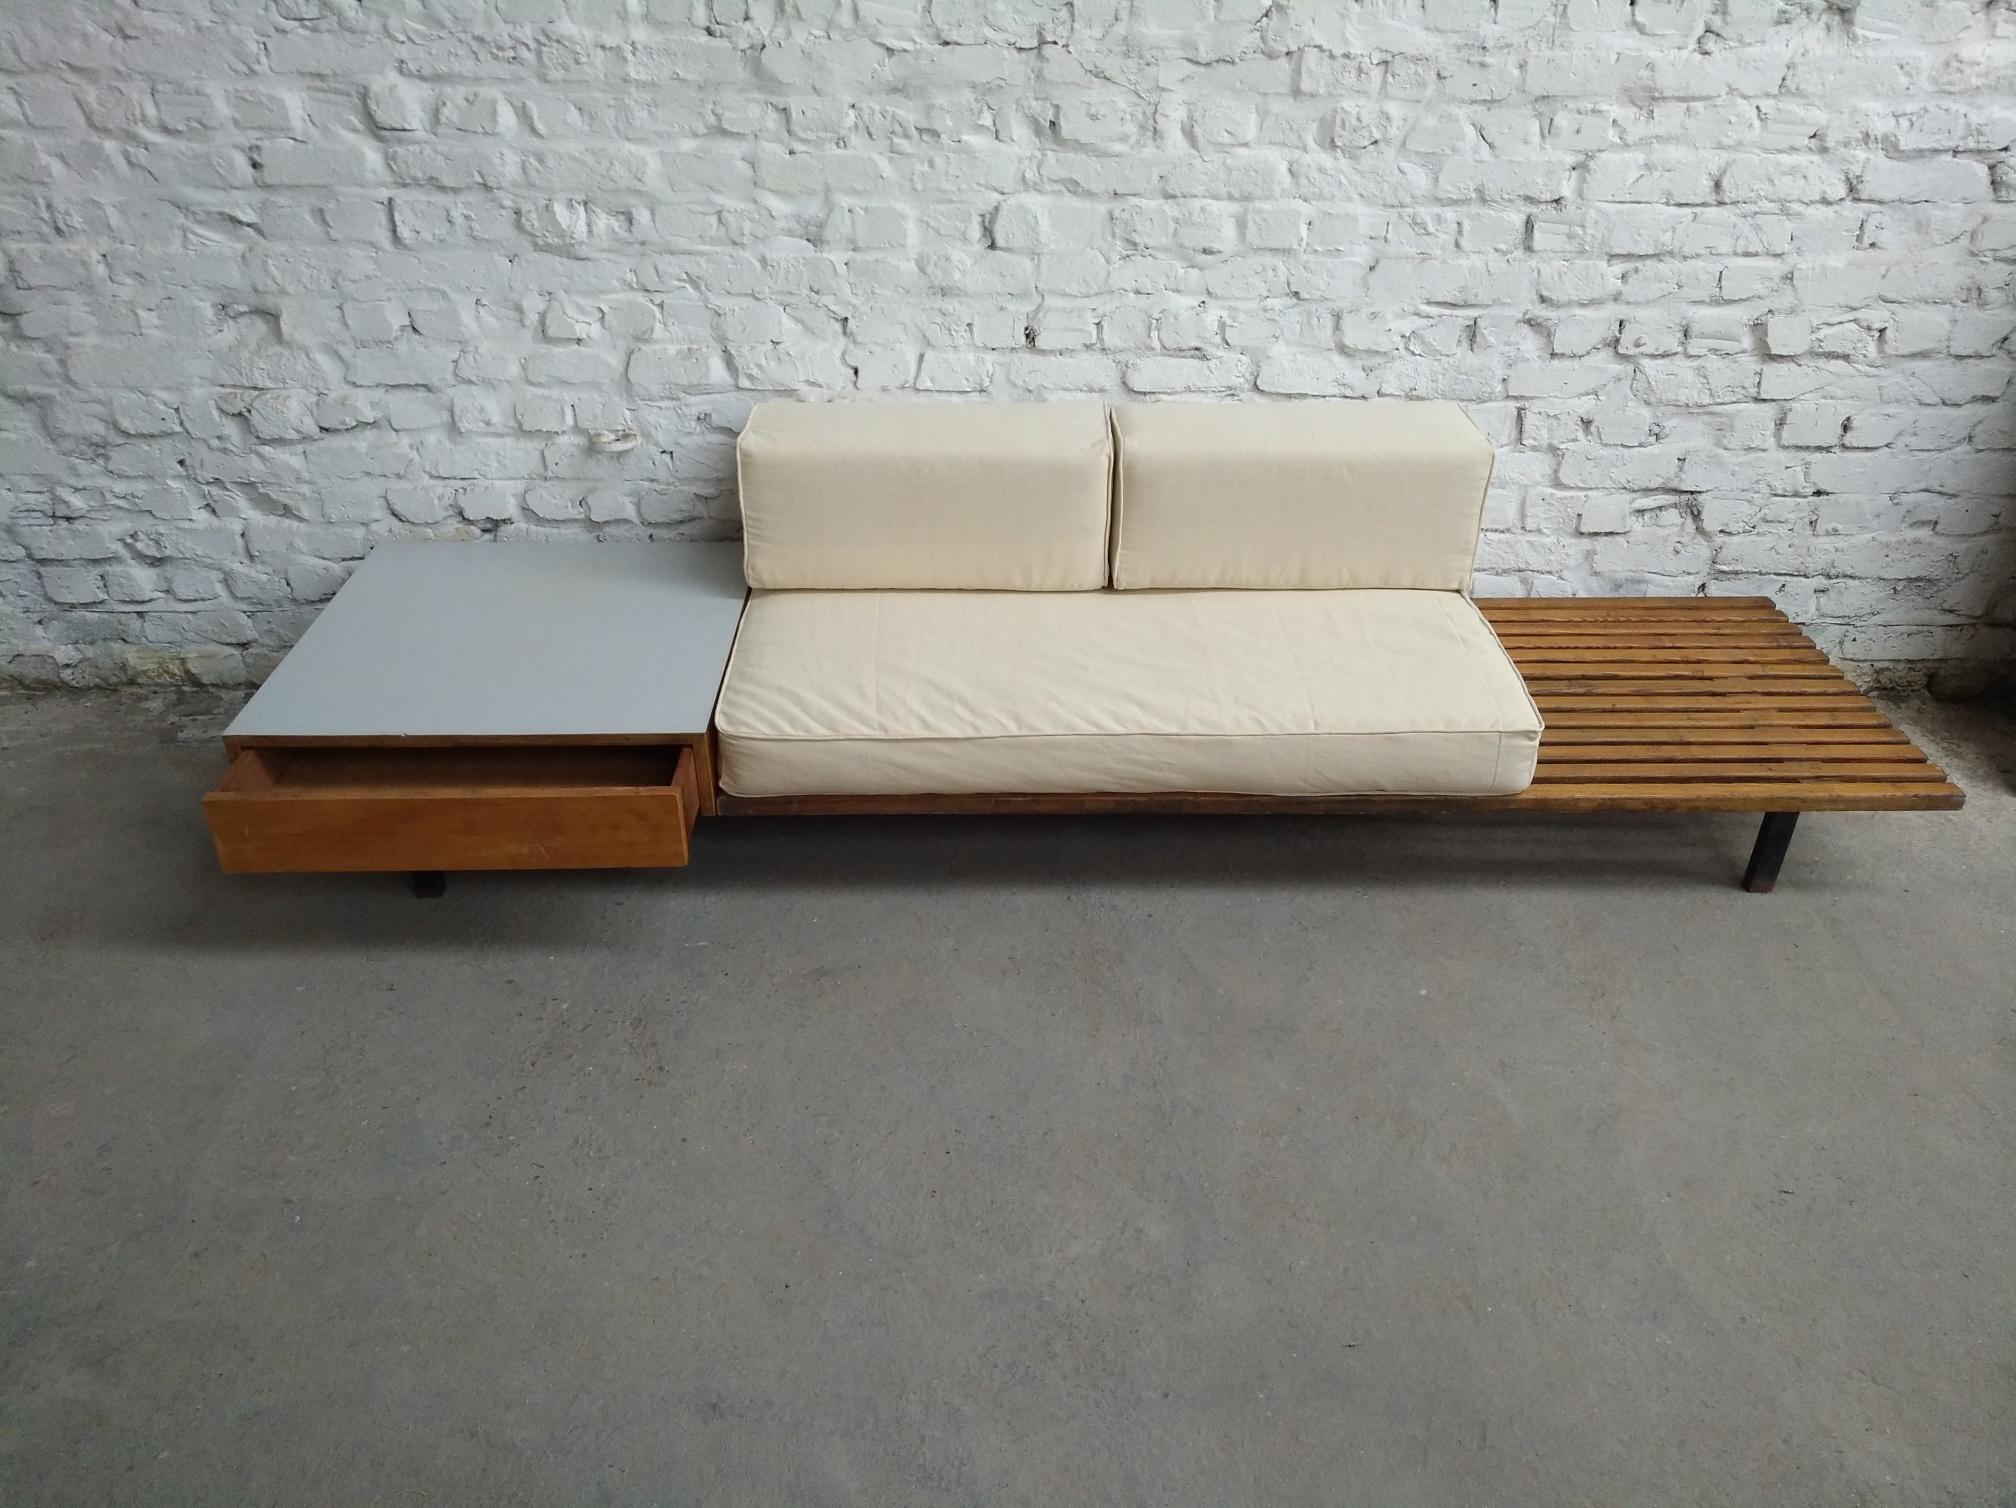 Charlotte Perriand Cansado bench daybed Steph Simon France 1959 For Sale 2